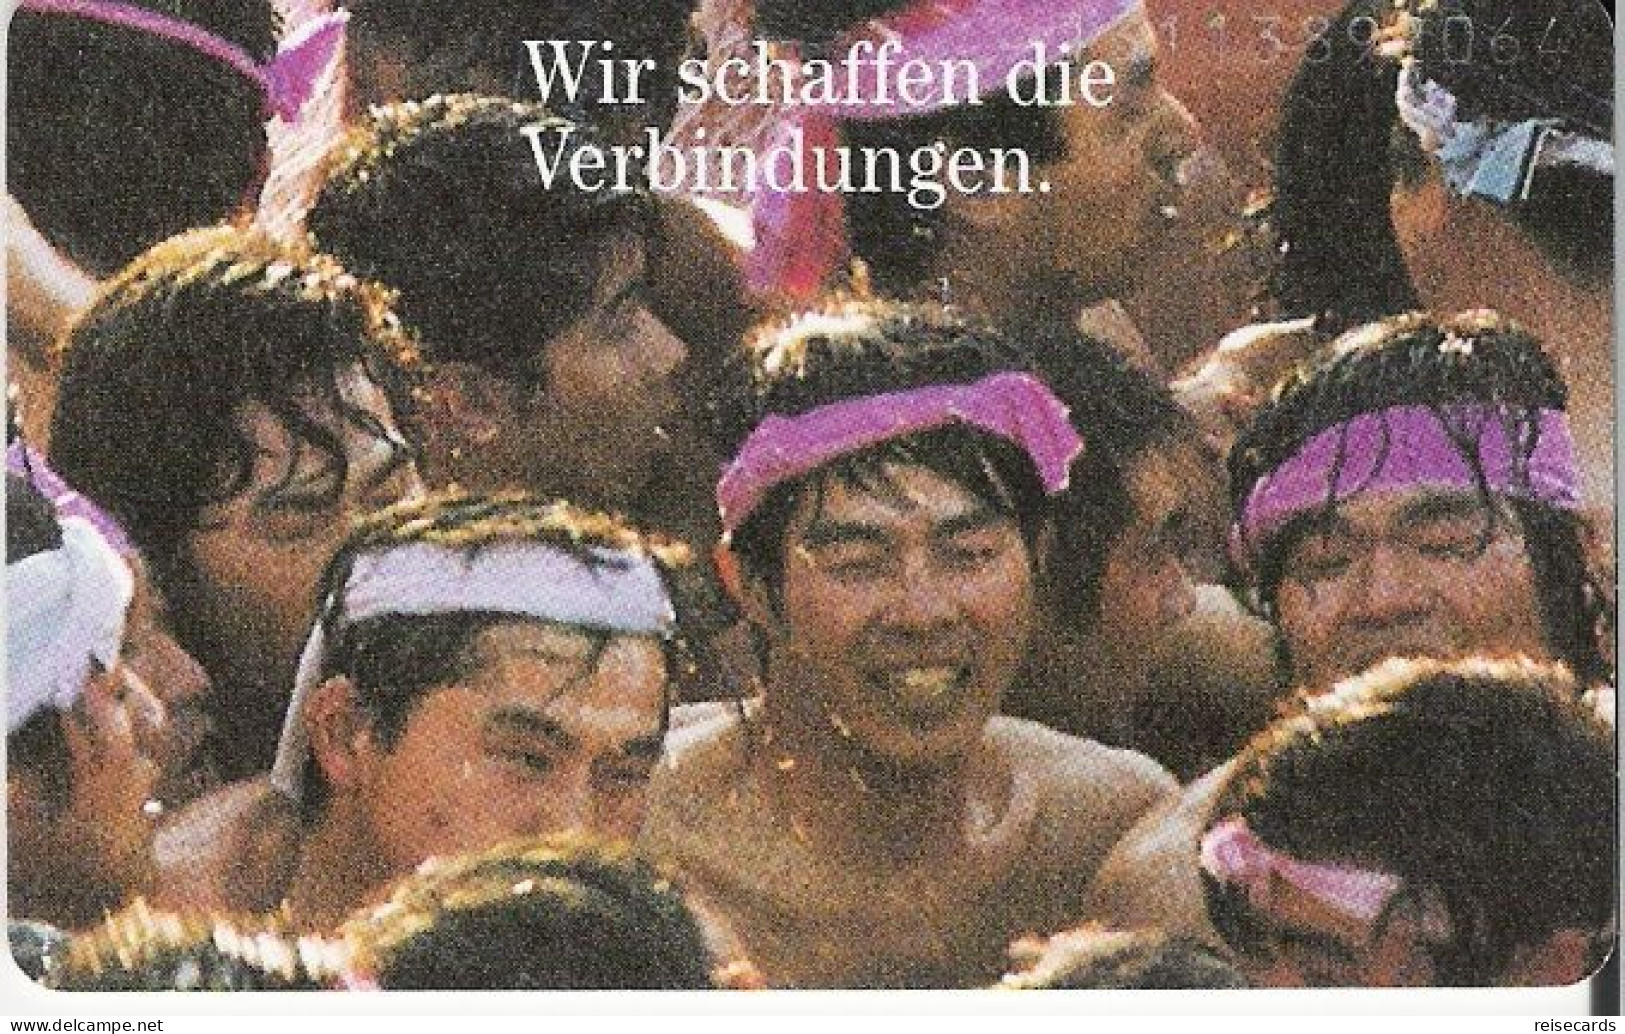 Germany: Telekom A 41 10.93 Weihnachtsedition 1993. Ichinomiya In Japan - A + AD-Series : Publicitaires - D. Telekom AG